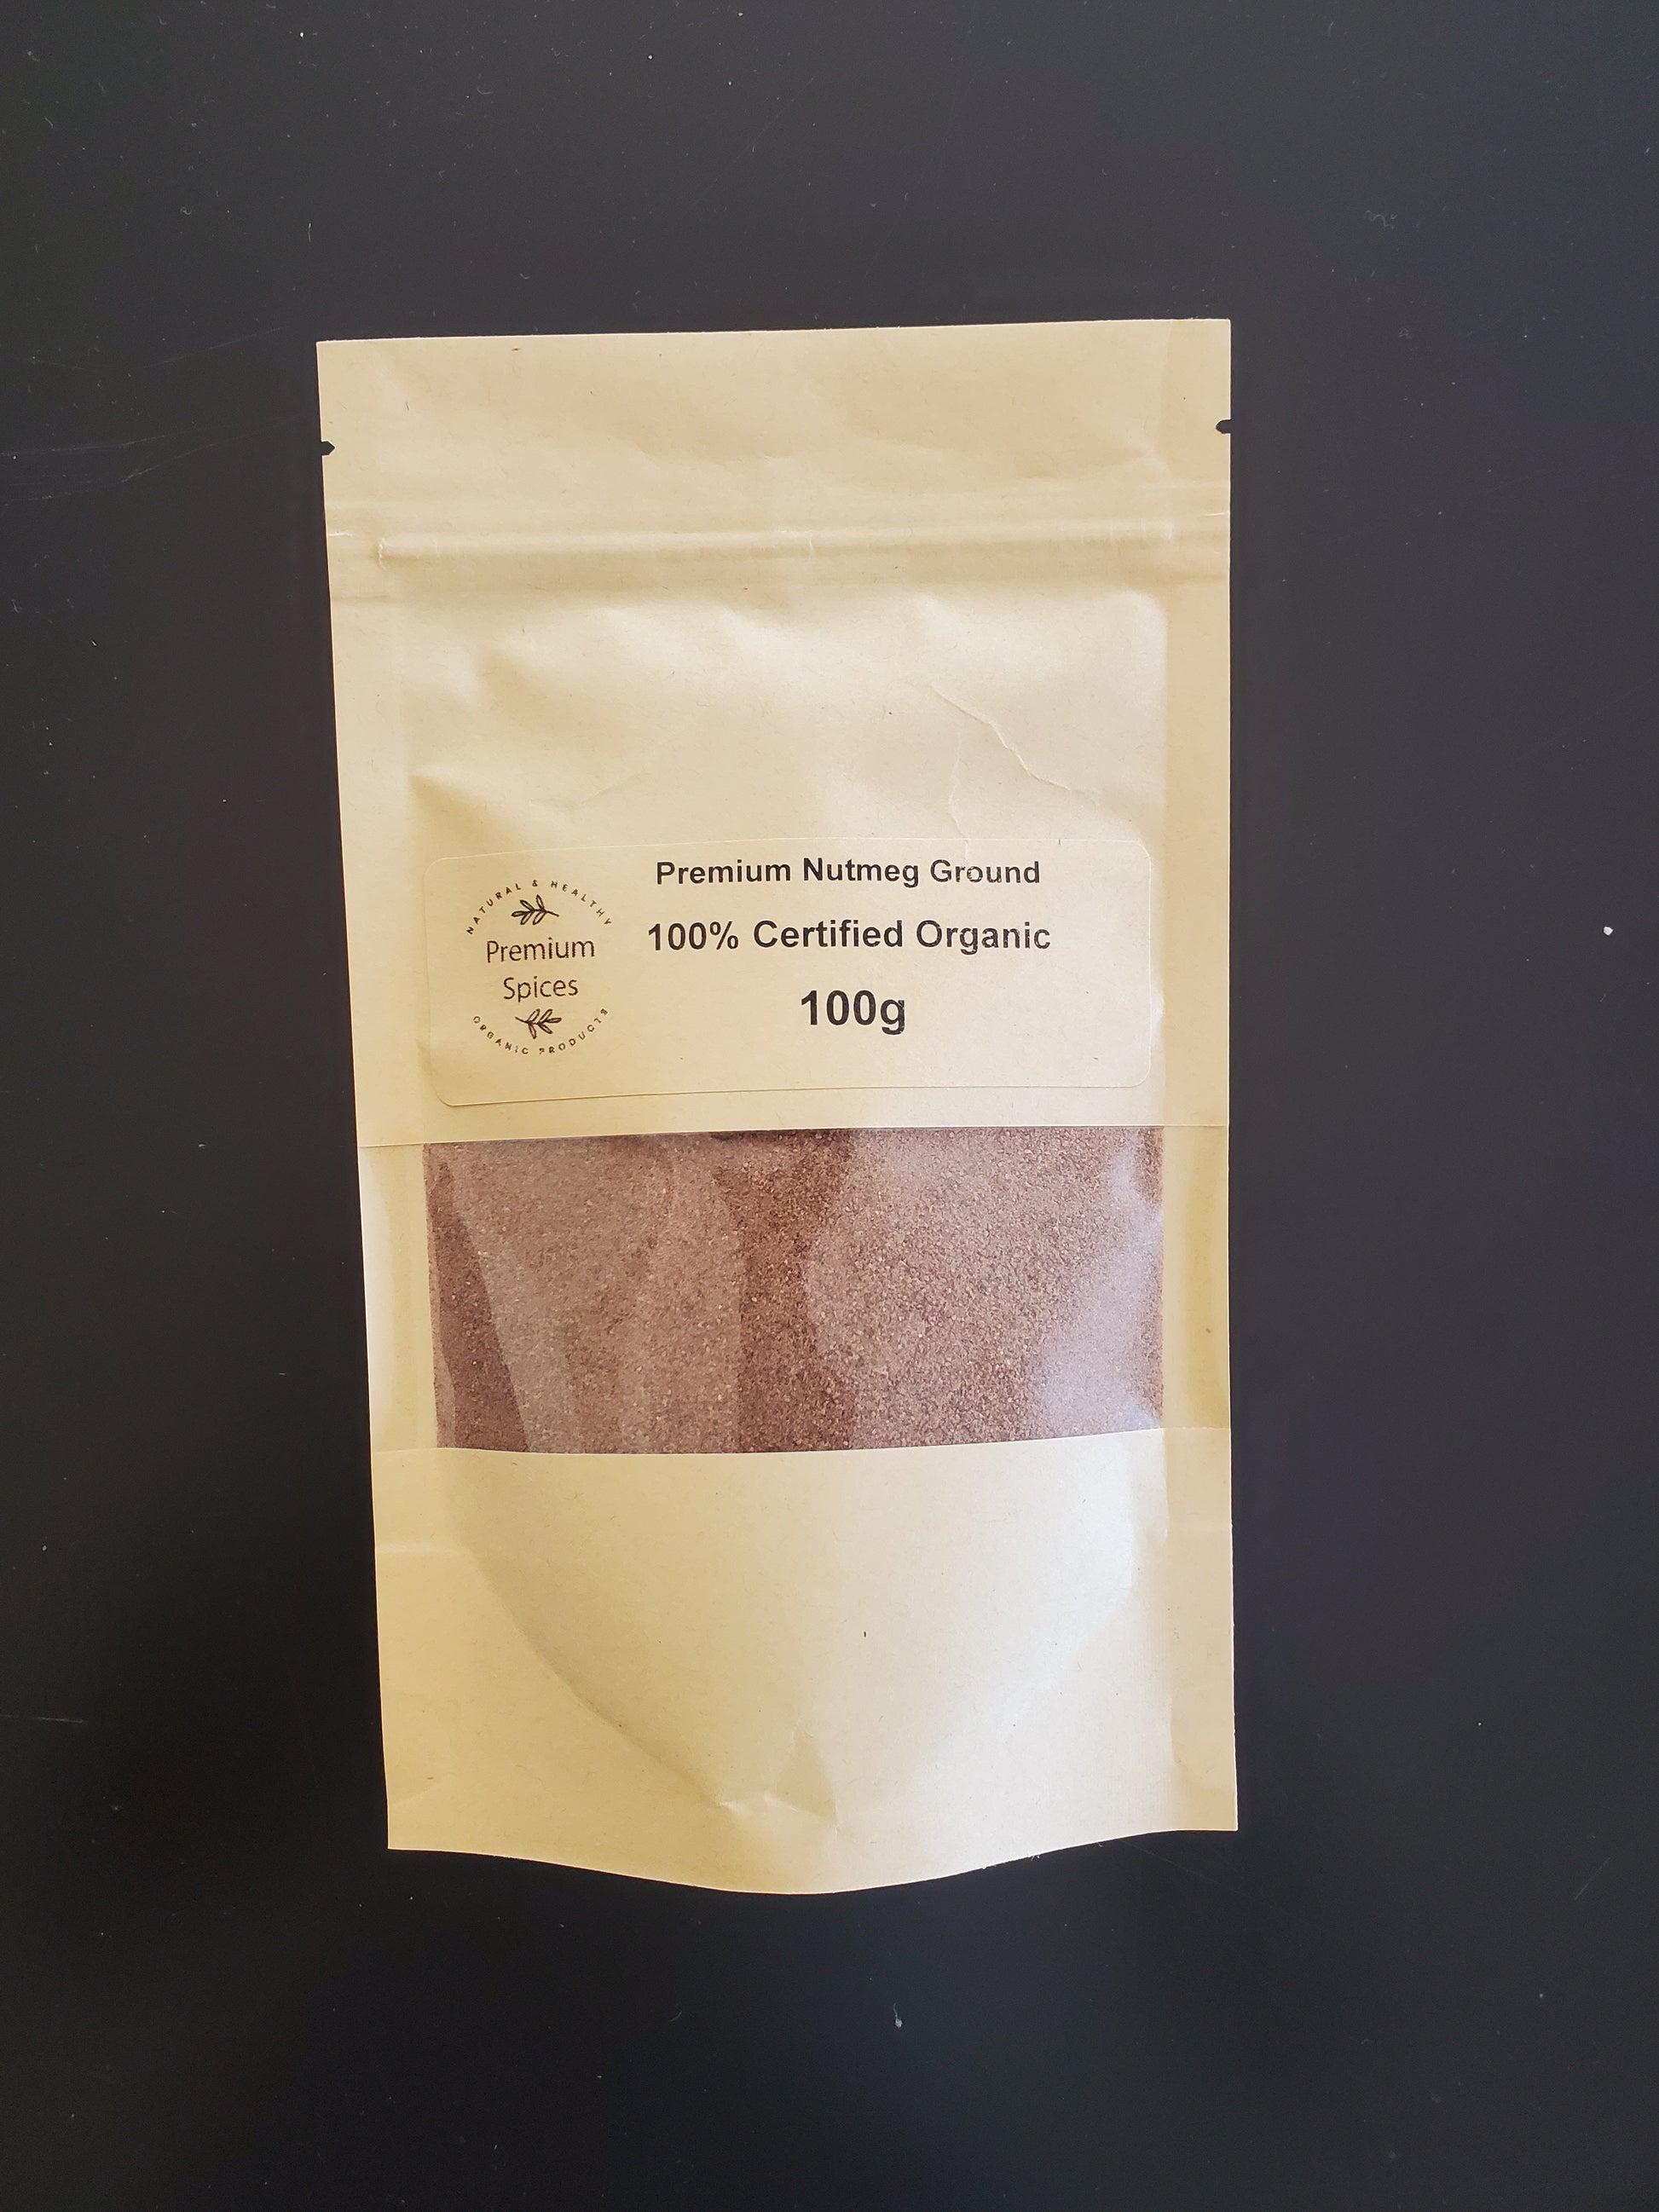 Organic Nutmeg Ground for NZ| Natural Spices showing 100g bag of our premium product